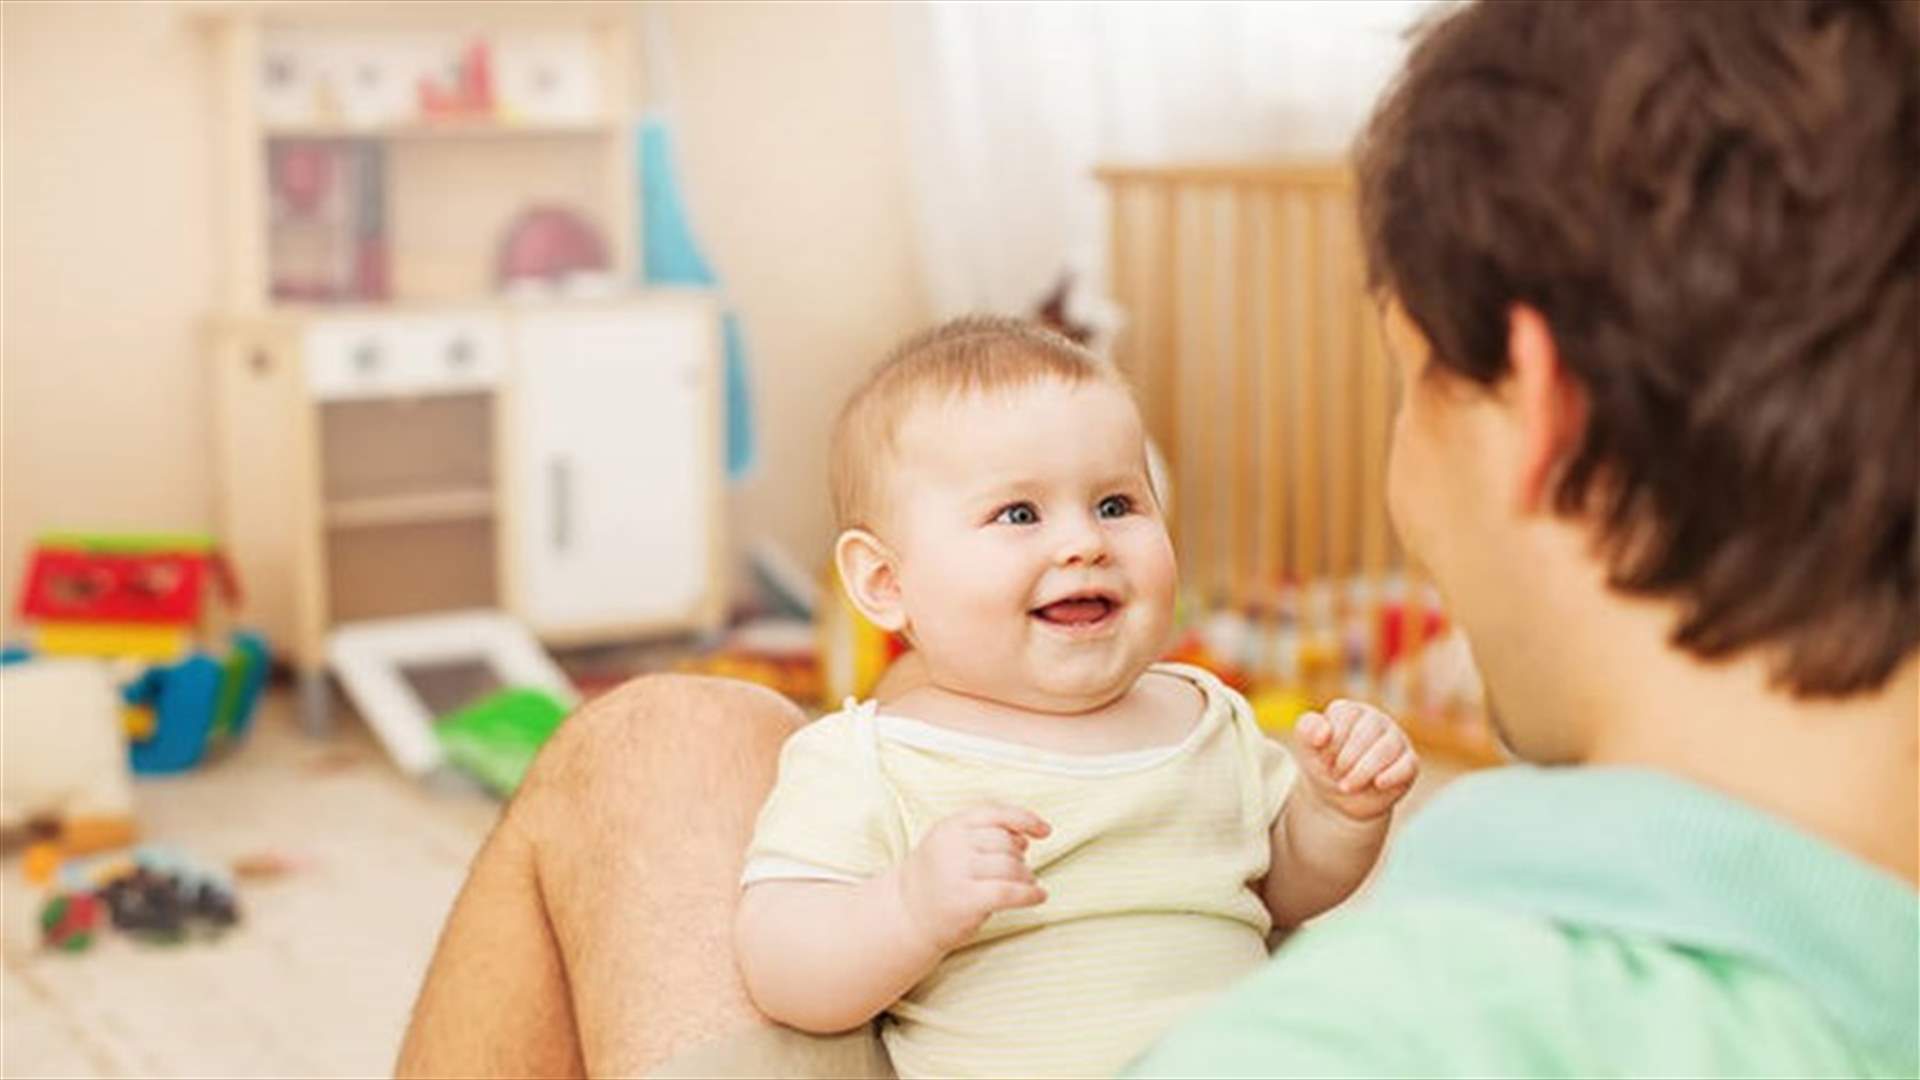 Reading To Your Six-Month Baby Can Boost Language Skills In Childhood-Study